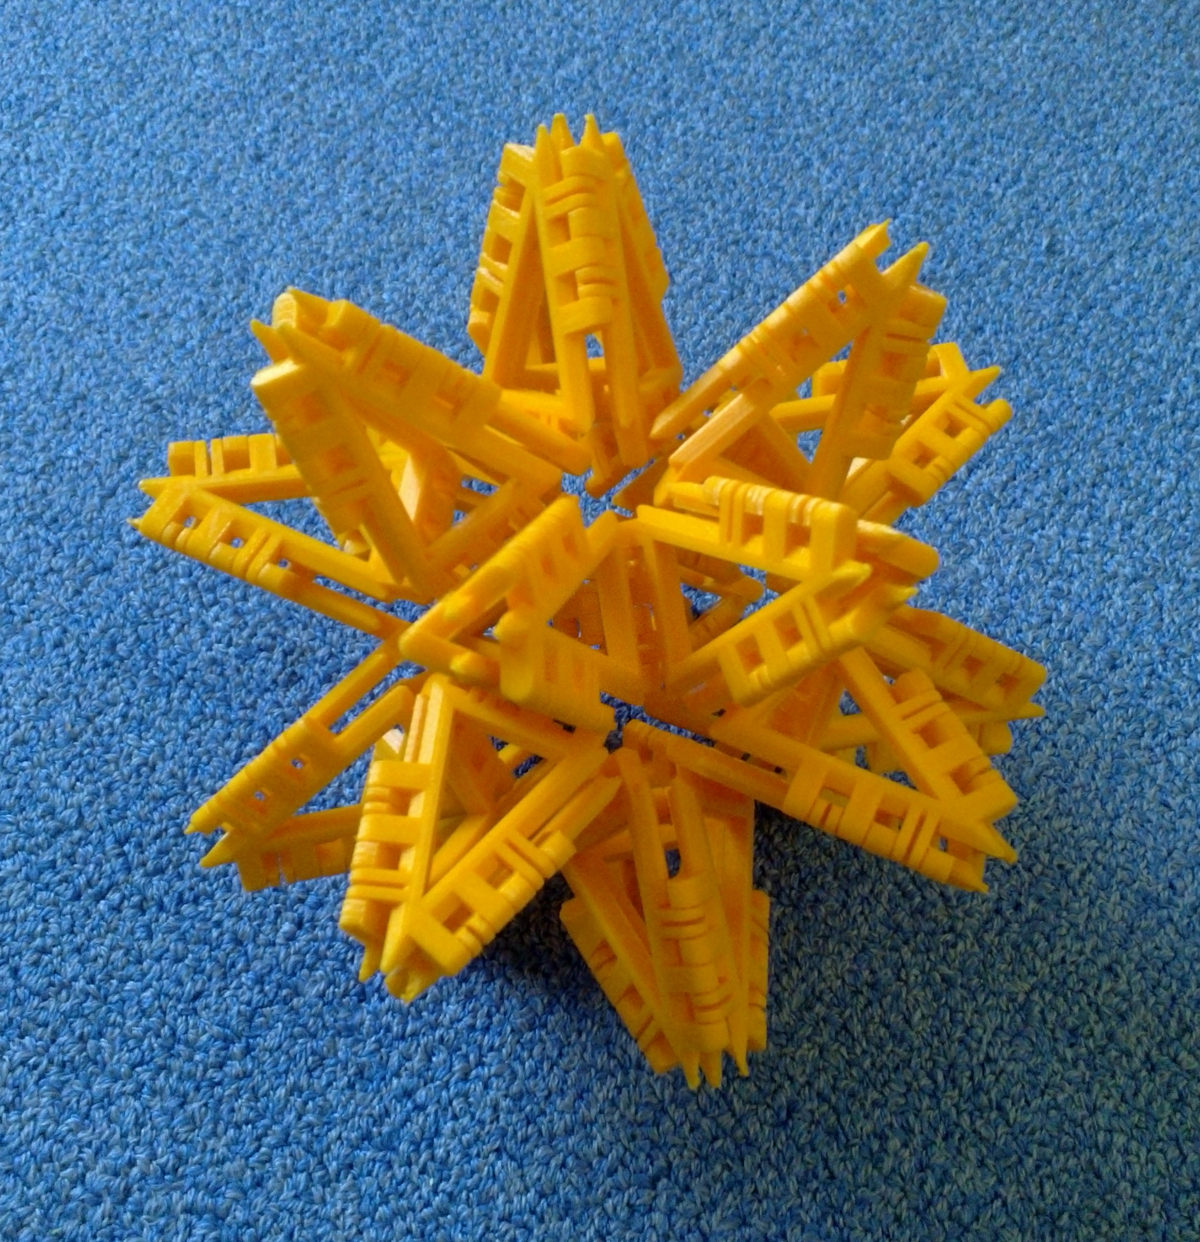 Cover image for article 'Great Stellated Dodecahedron'